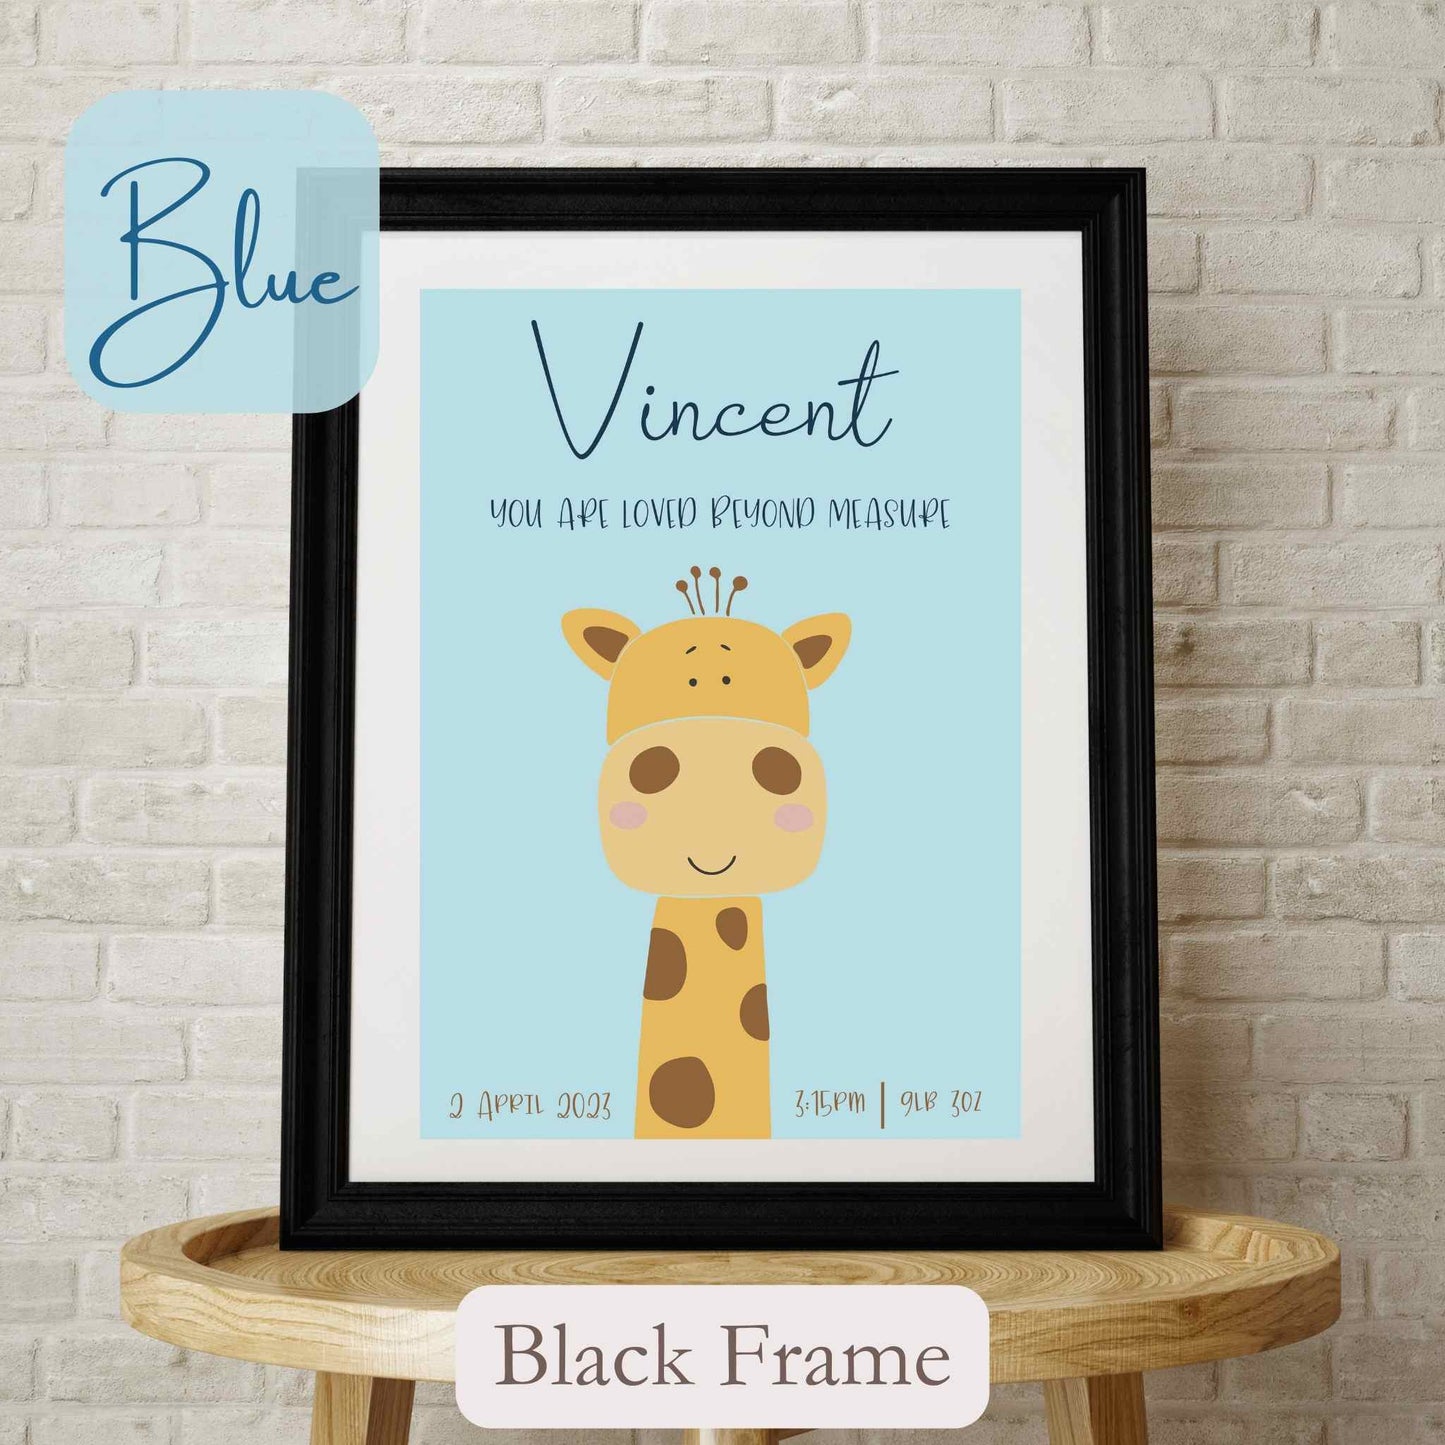 Personalised Framed Print with cute Giraffe, on blue coloured background with child’s name, and wording under name. Black Frame.